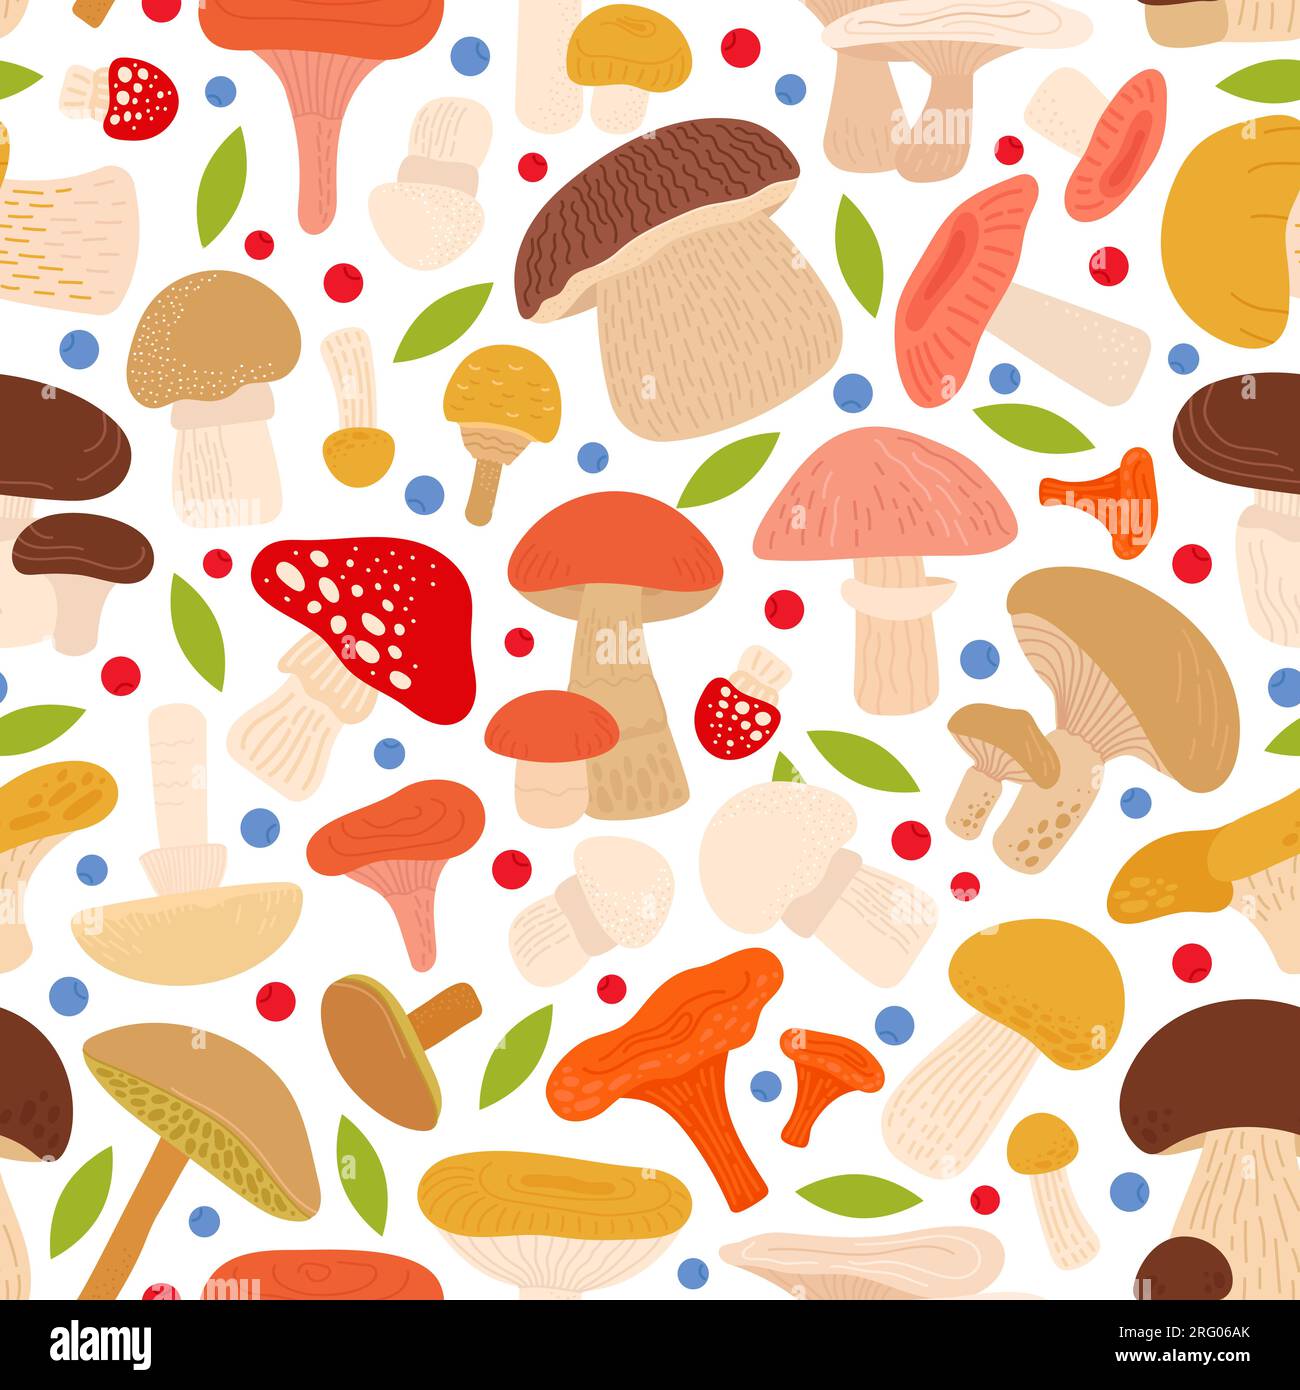 Mushroom seamless pattern. Forest planting, autumn mushroom, leaves and berries. Fall wild nature elements, harvest decent vector fabric print Stock Vector